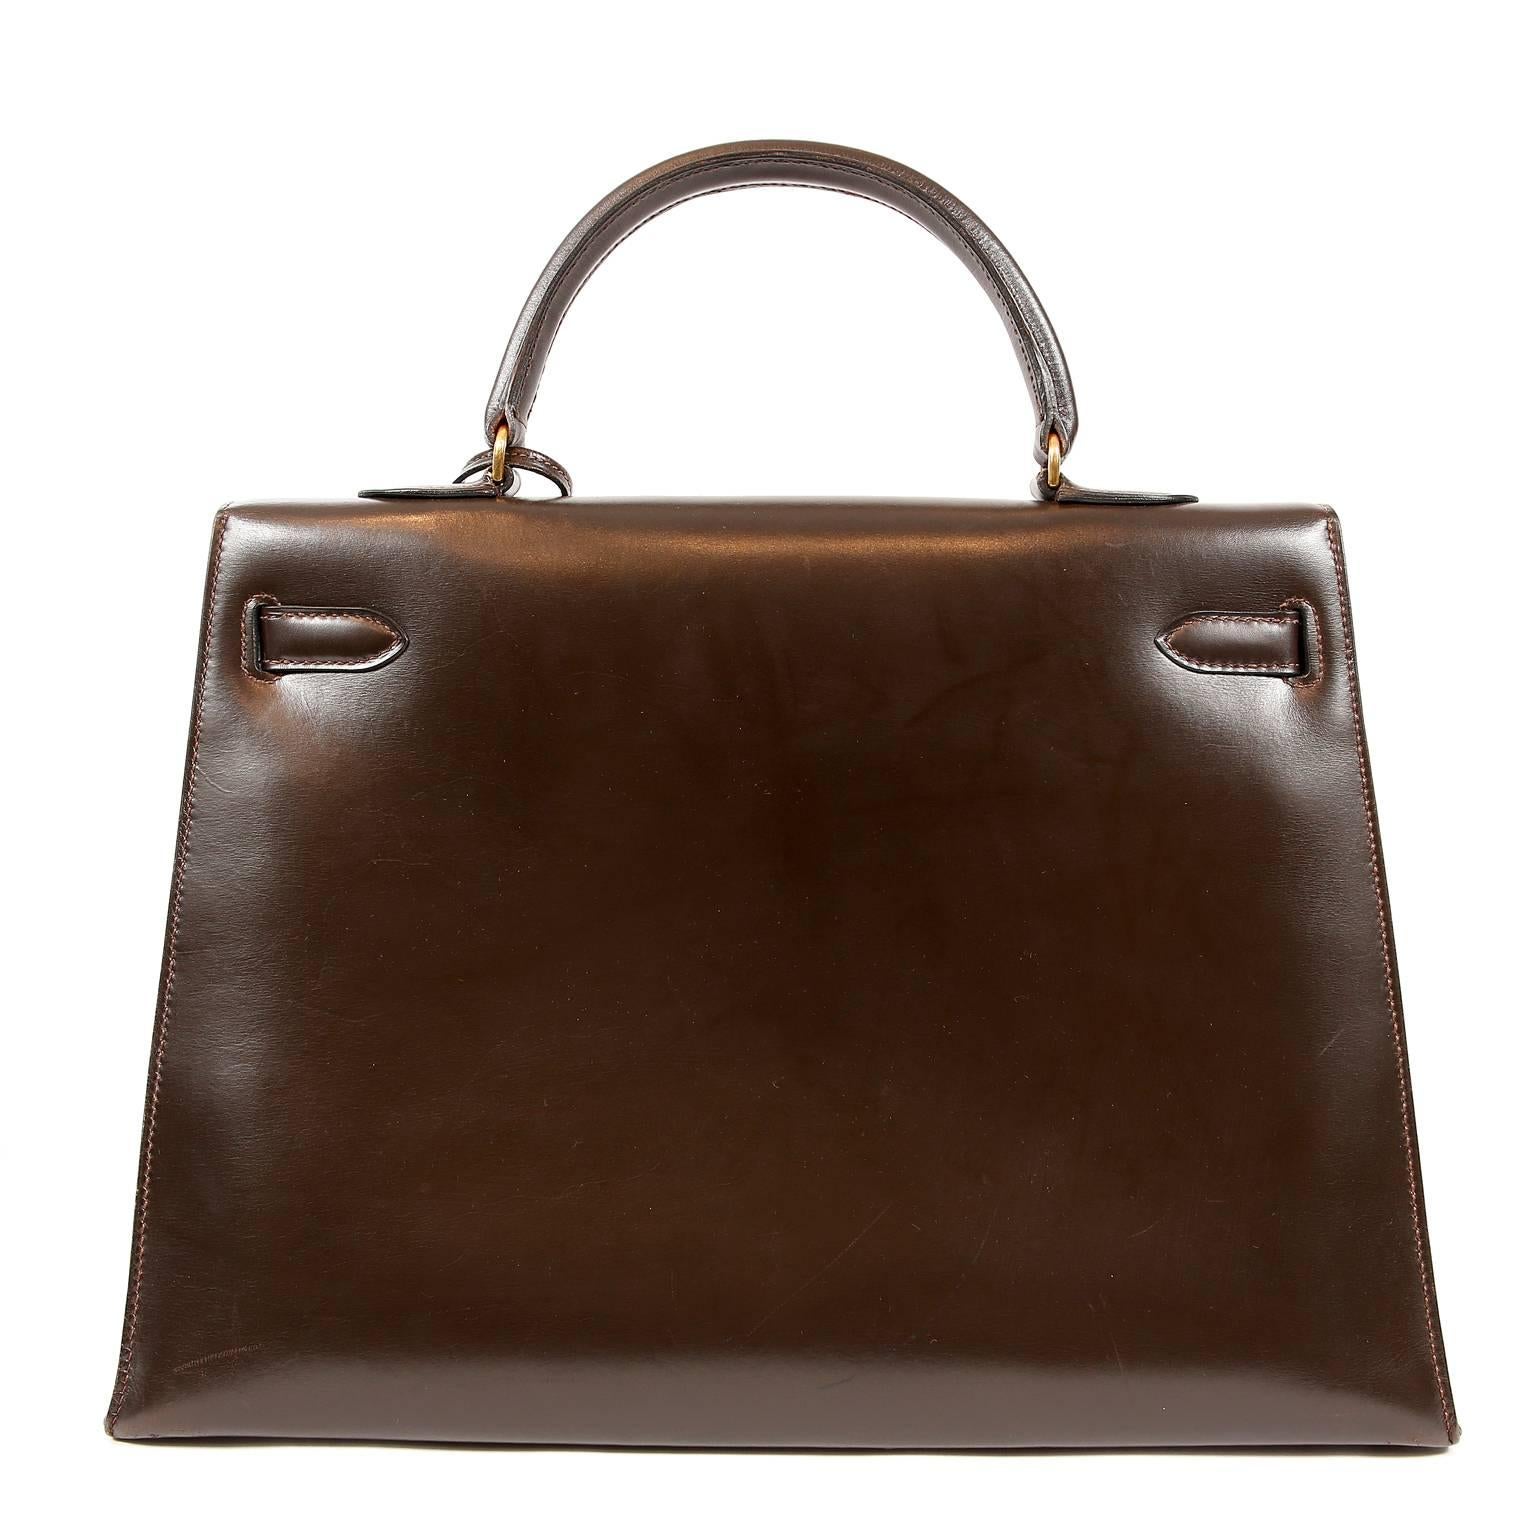 This authentic Hermès Chocolate Box Calf 35 cm Kelly Bag is in excellent vintage condition.    Hermès bags are considered the ultimate luxury item worldwide.  Each piece is handcrafted with waitlists that can exceed a year or more.  This Kelly is